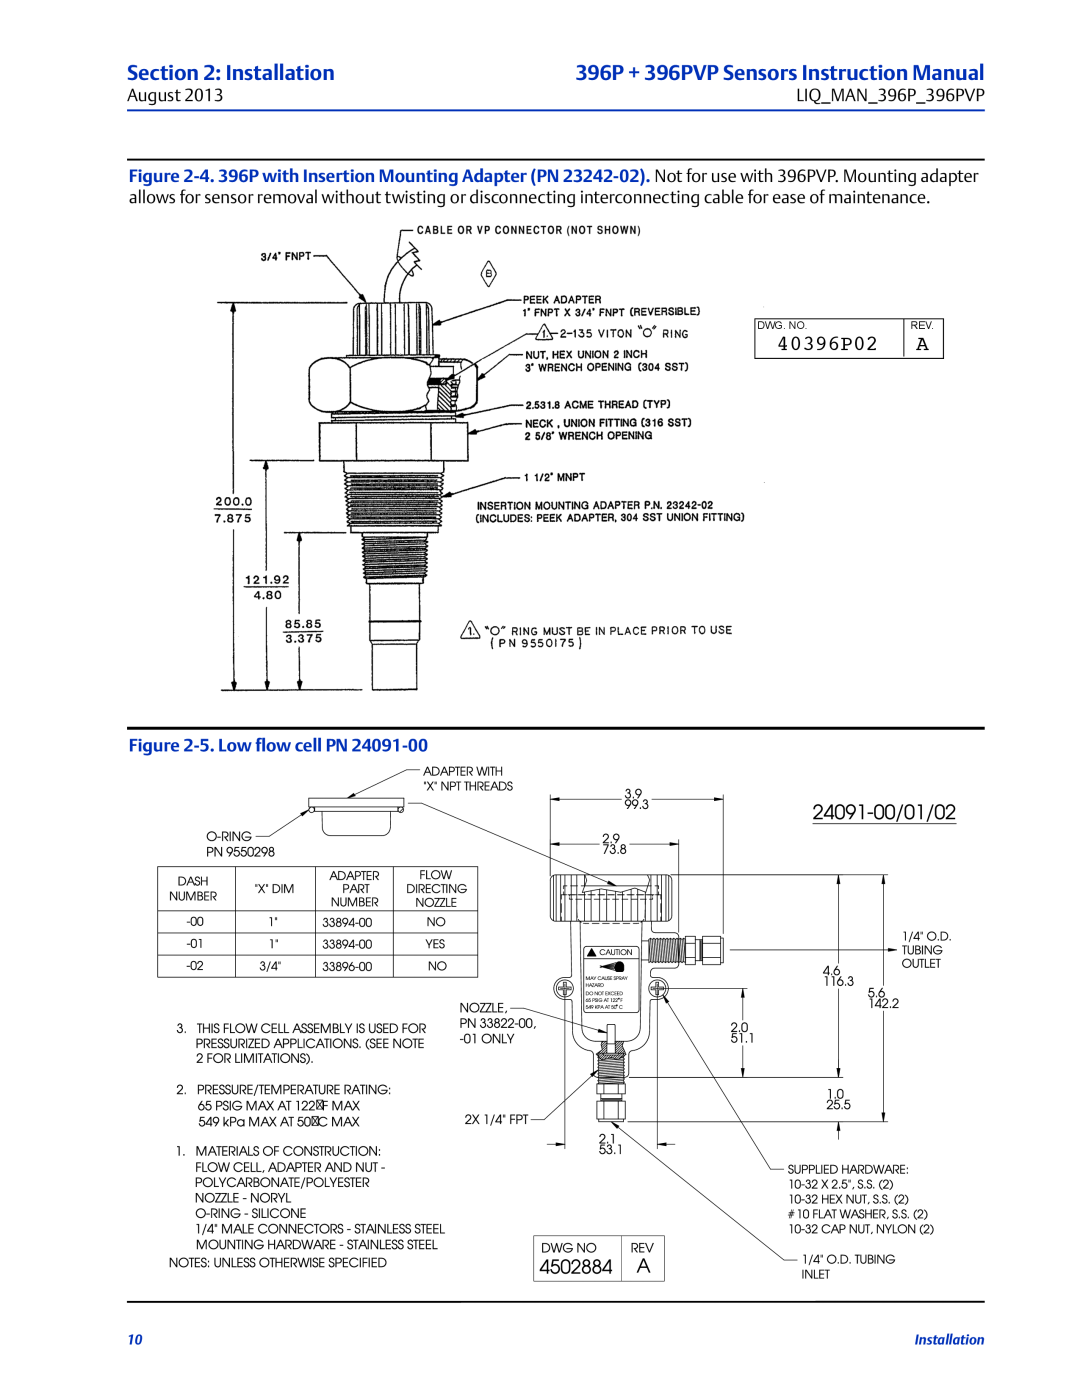 Emerson instruction manual 40396P02, 5.Low flow cell PN, Installation, 396P + 396PVP Sensors Instruction Manual 